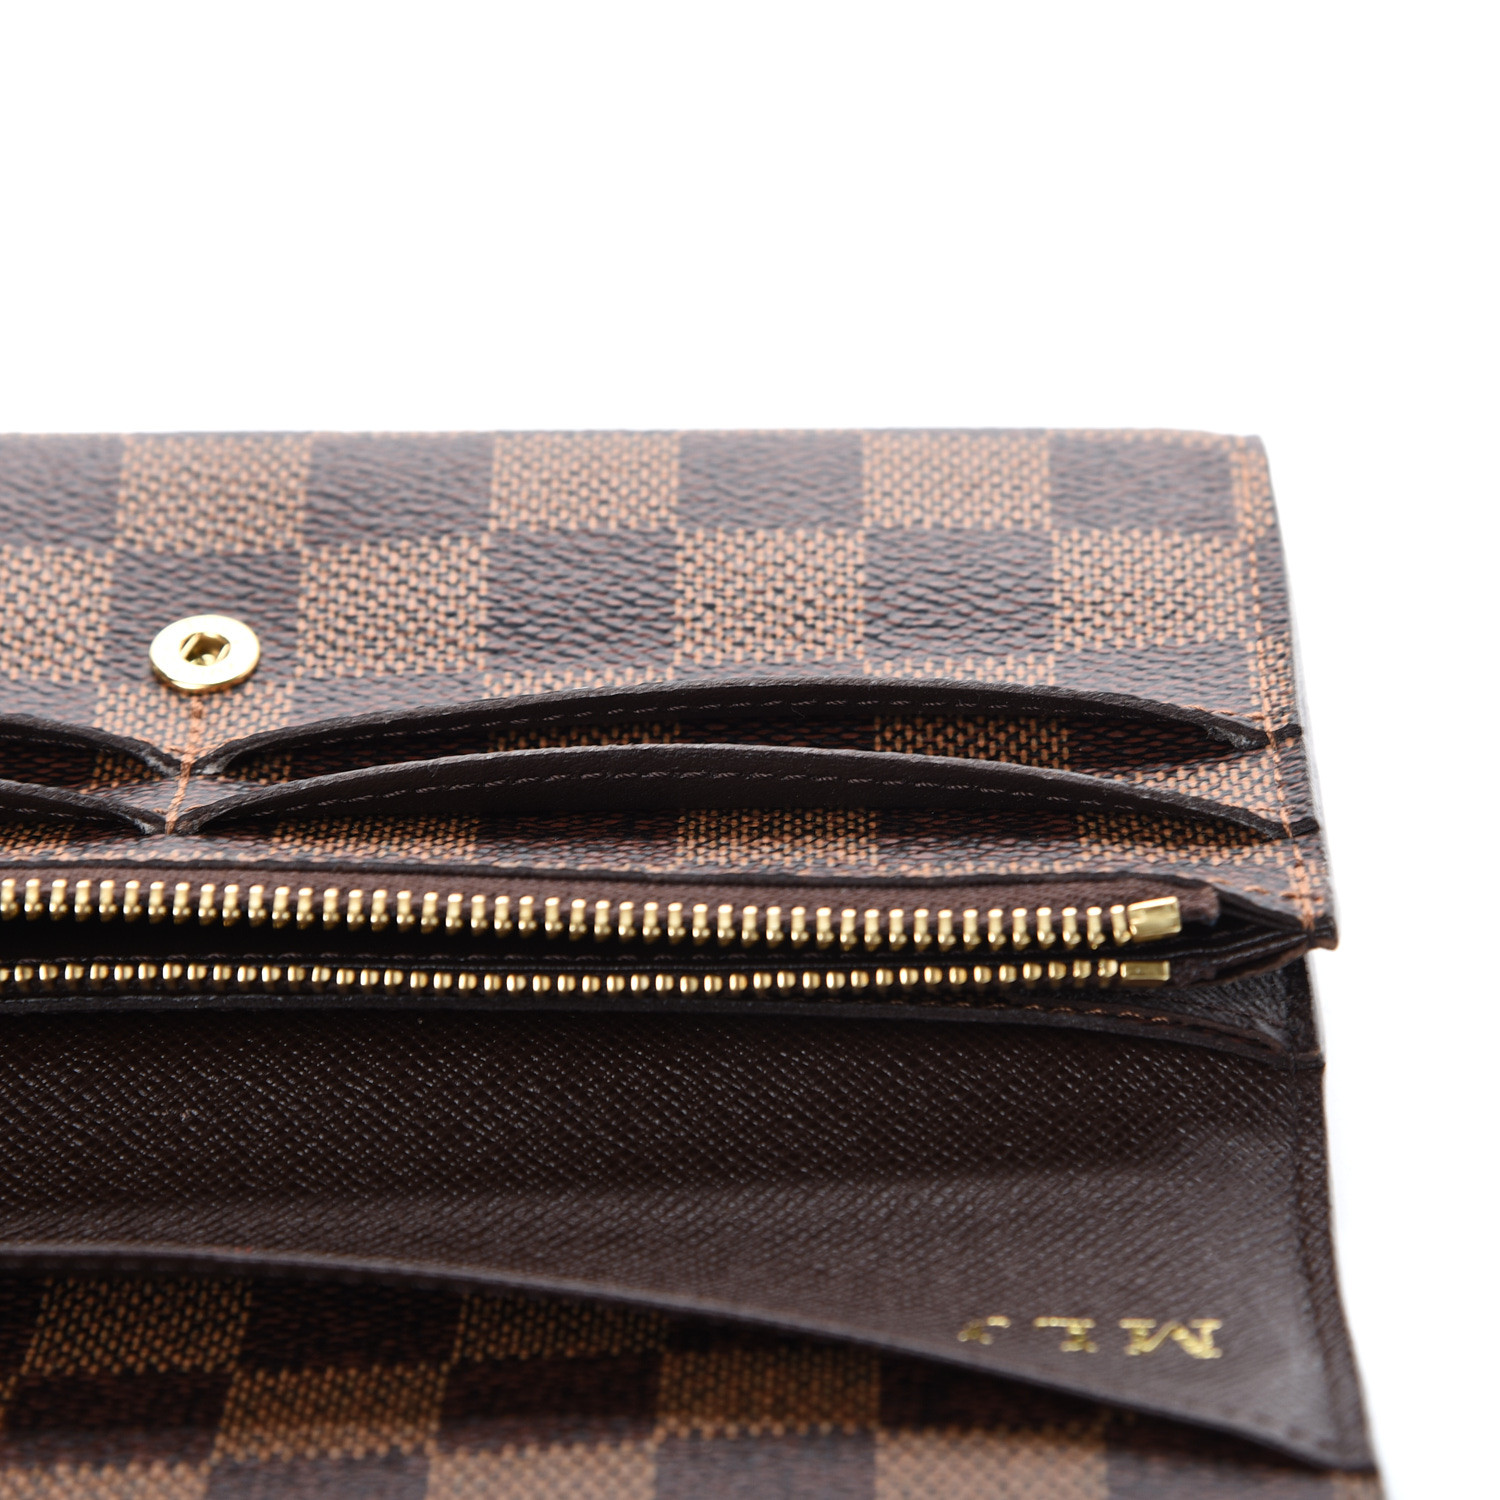 Emilie Wallet Lv Review  Natural Resource Department